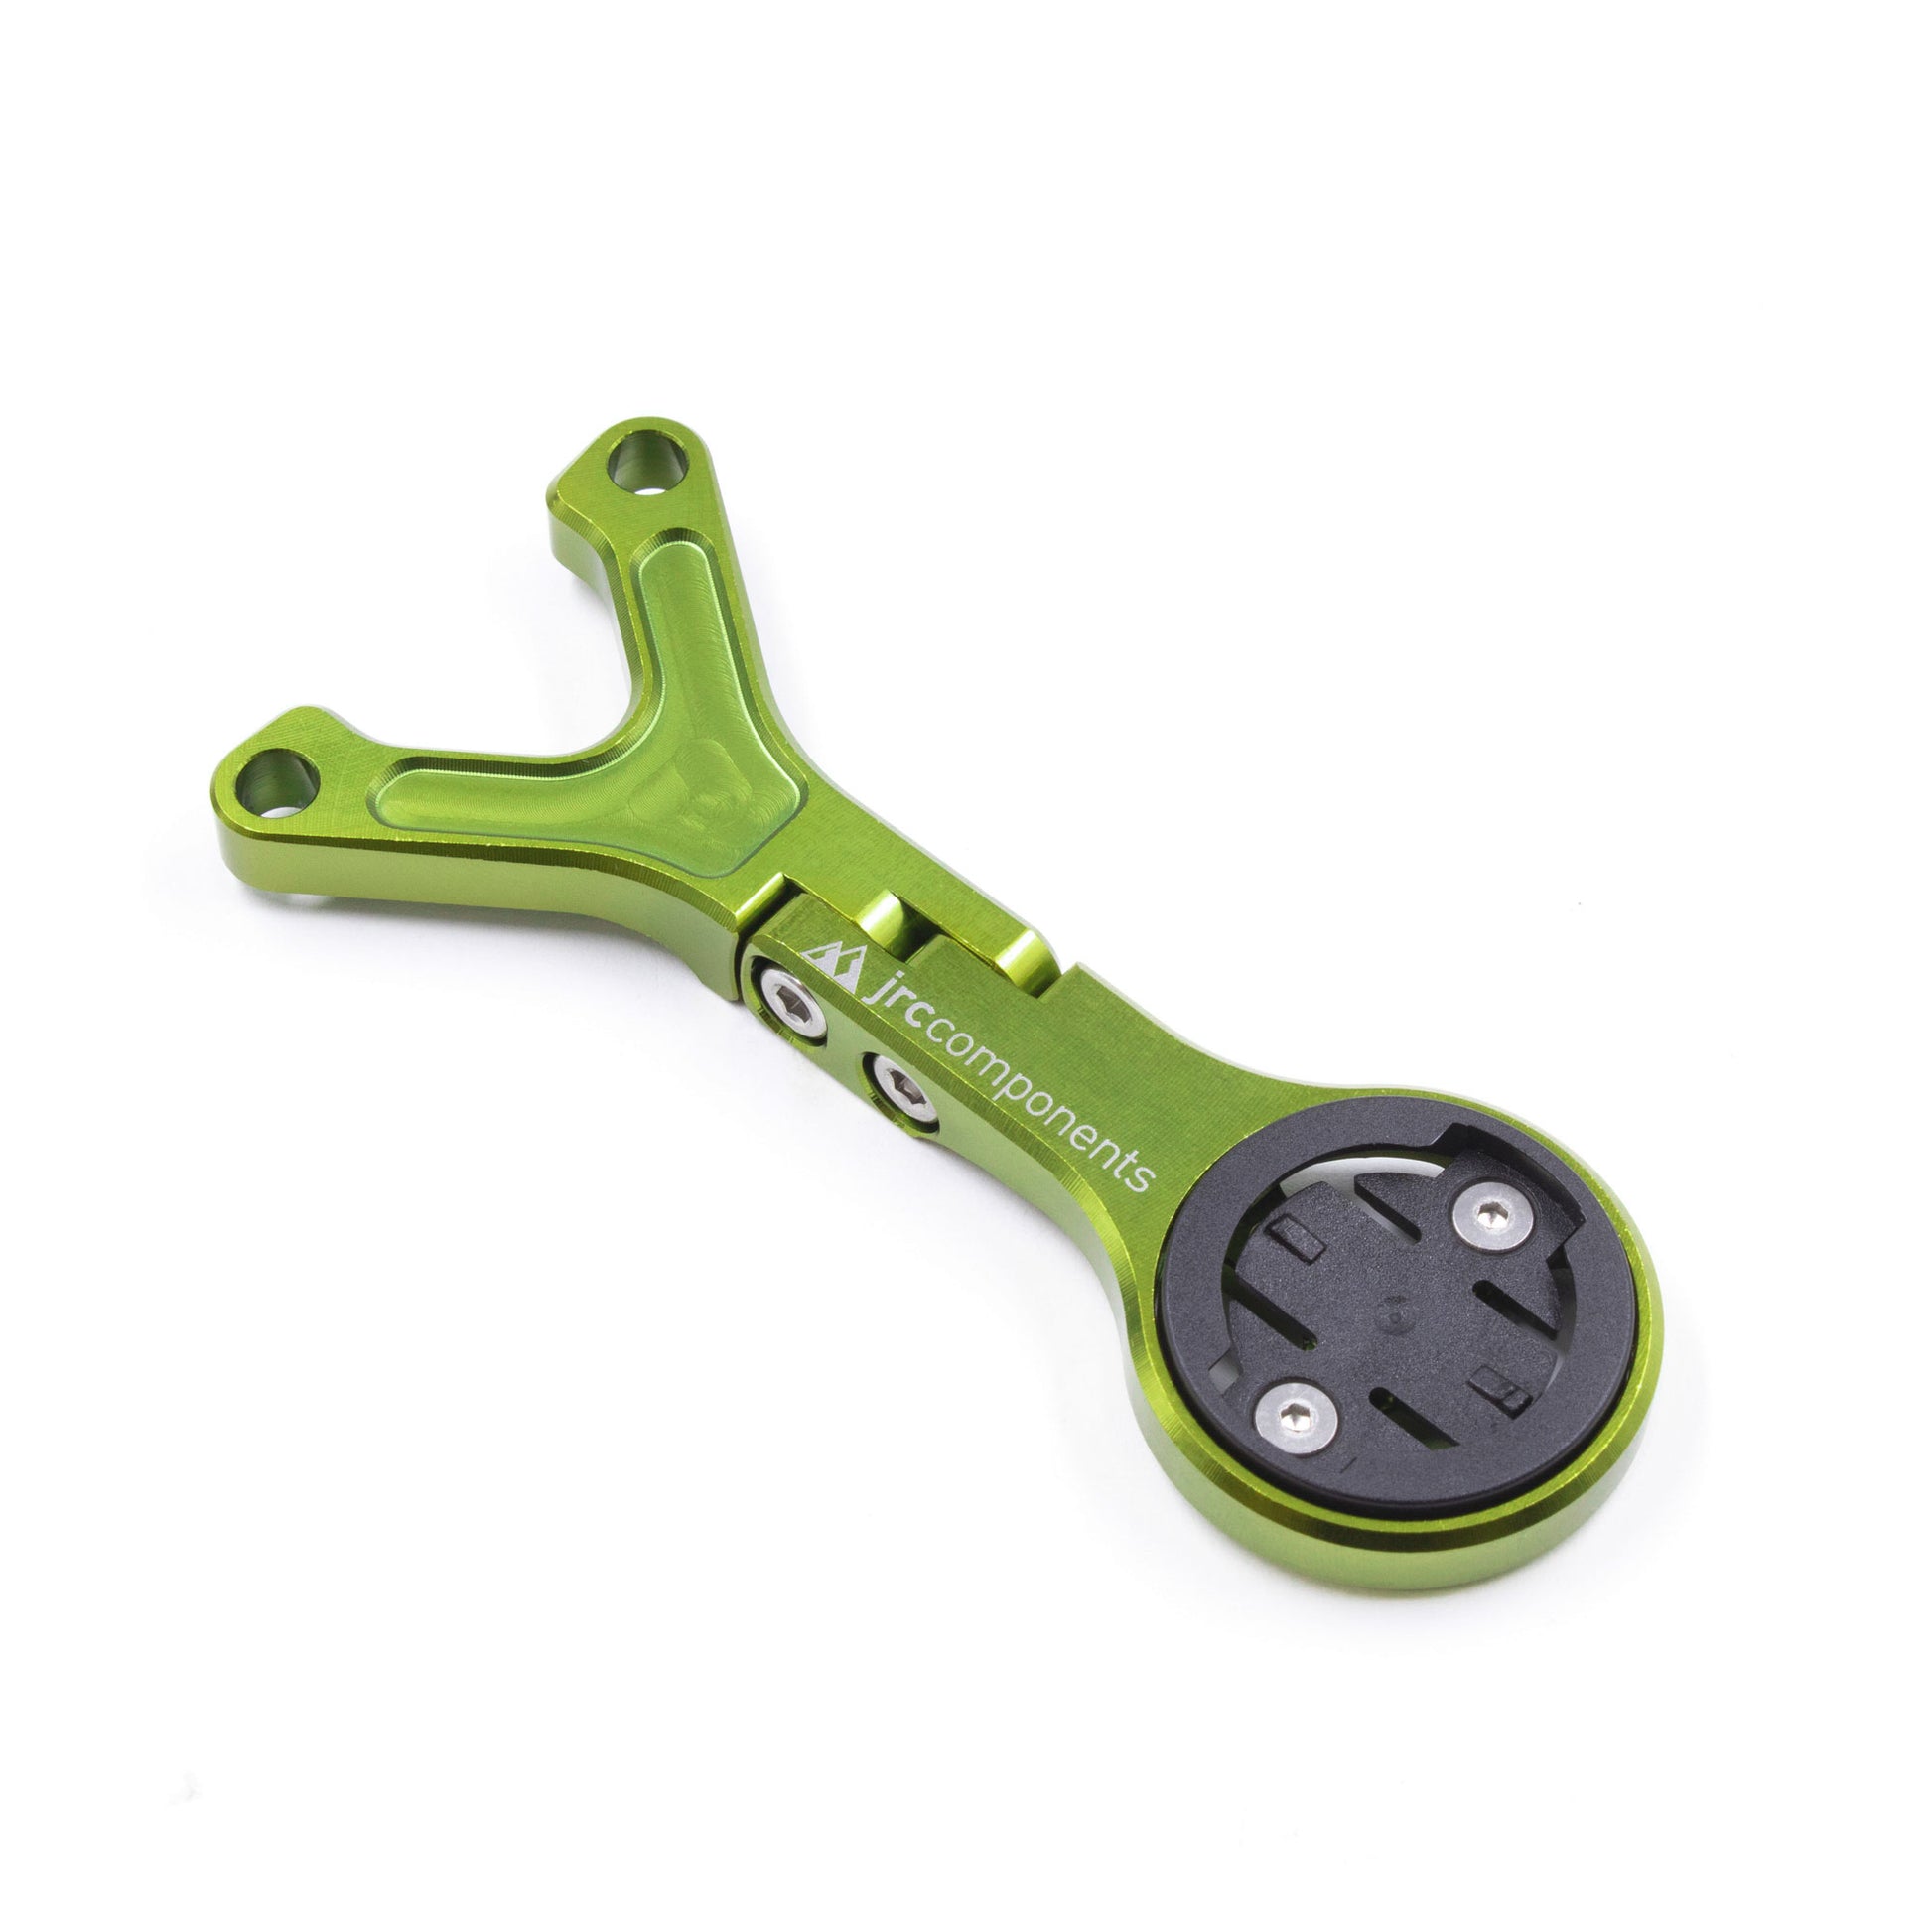 JRC Components, Lightweight Underbar Out Front Mount GPS Computer Mount for Cannondale Hollowgram Knot and Save Handlebar and Stem System for Wahoo in Acid Green